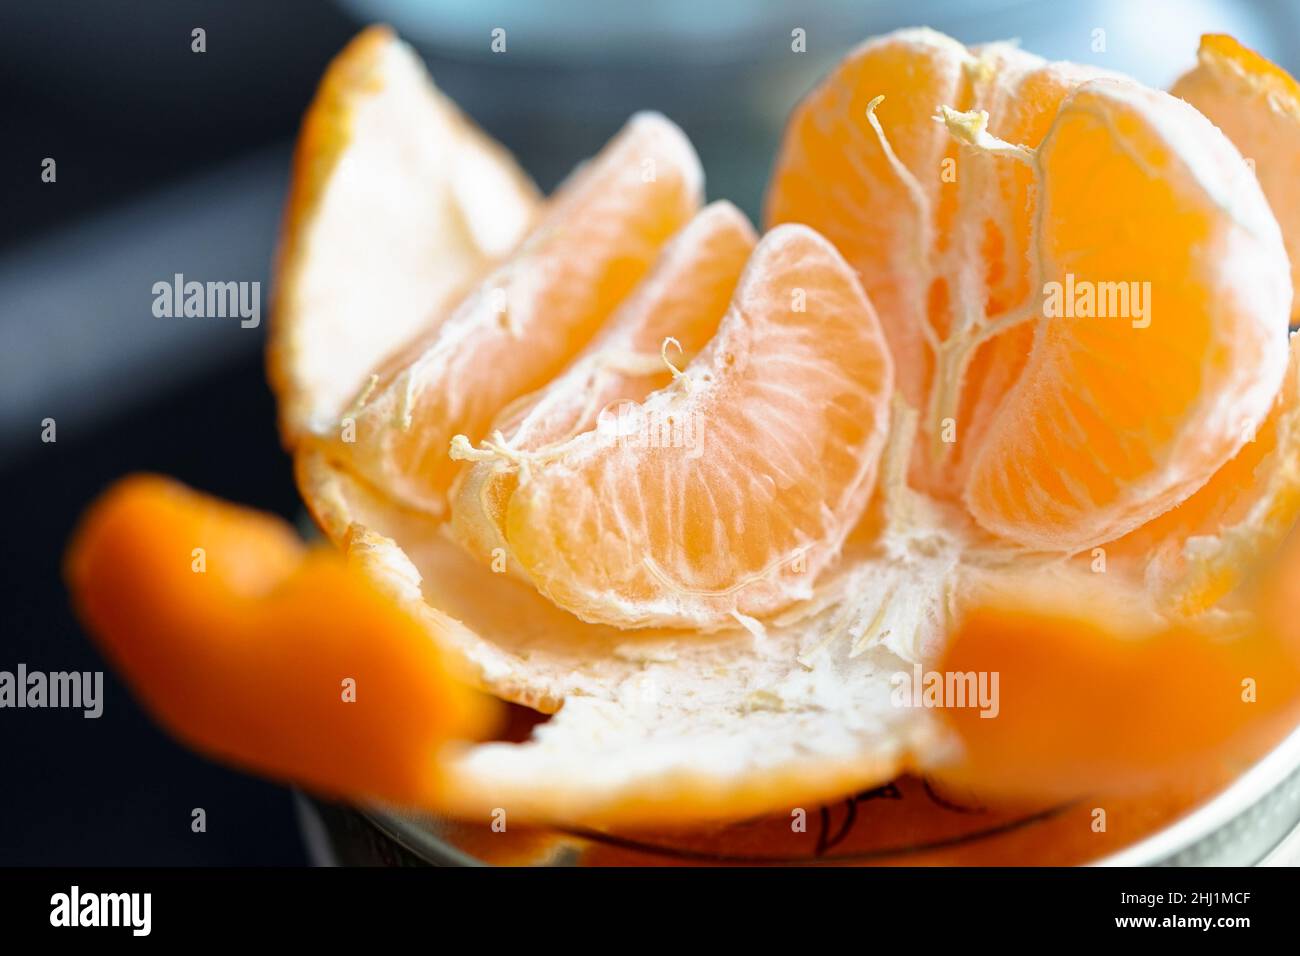 Peeled and sliced into bright tangerines Stock Photo